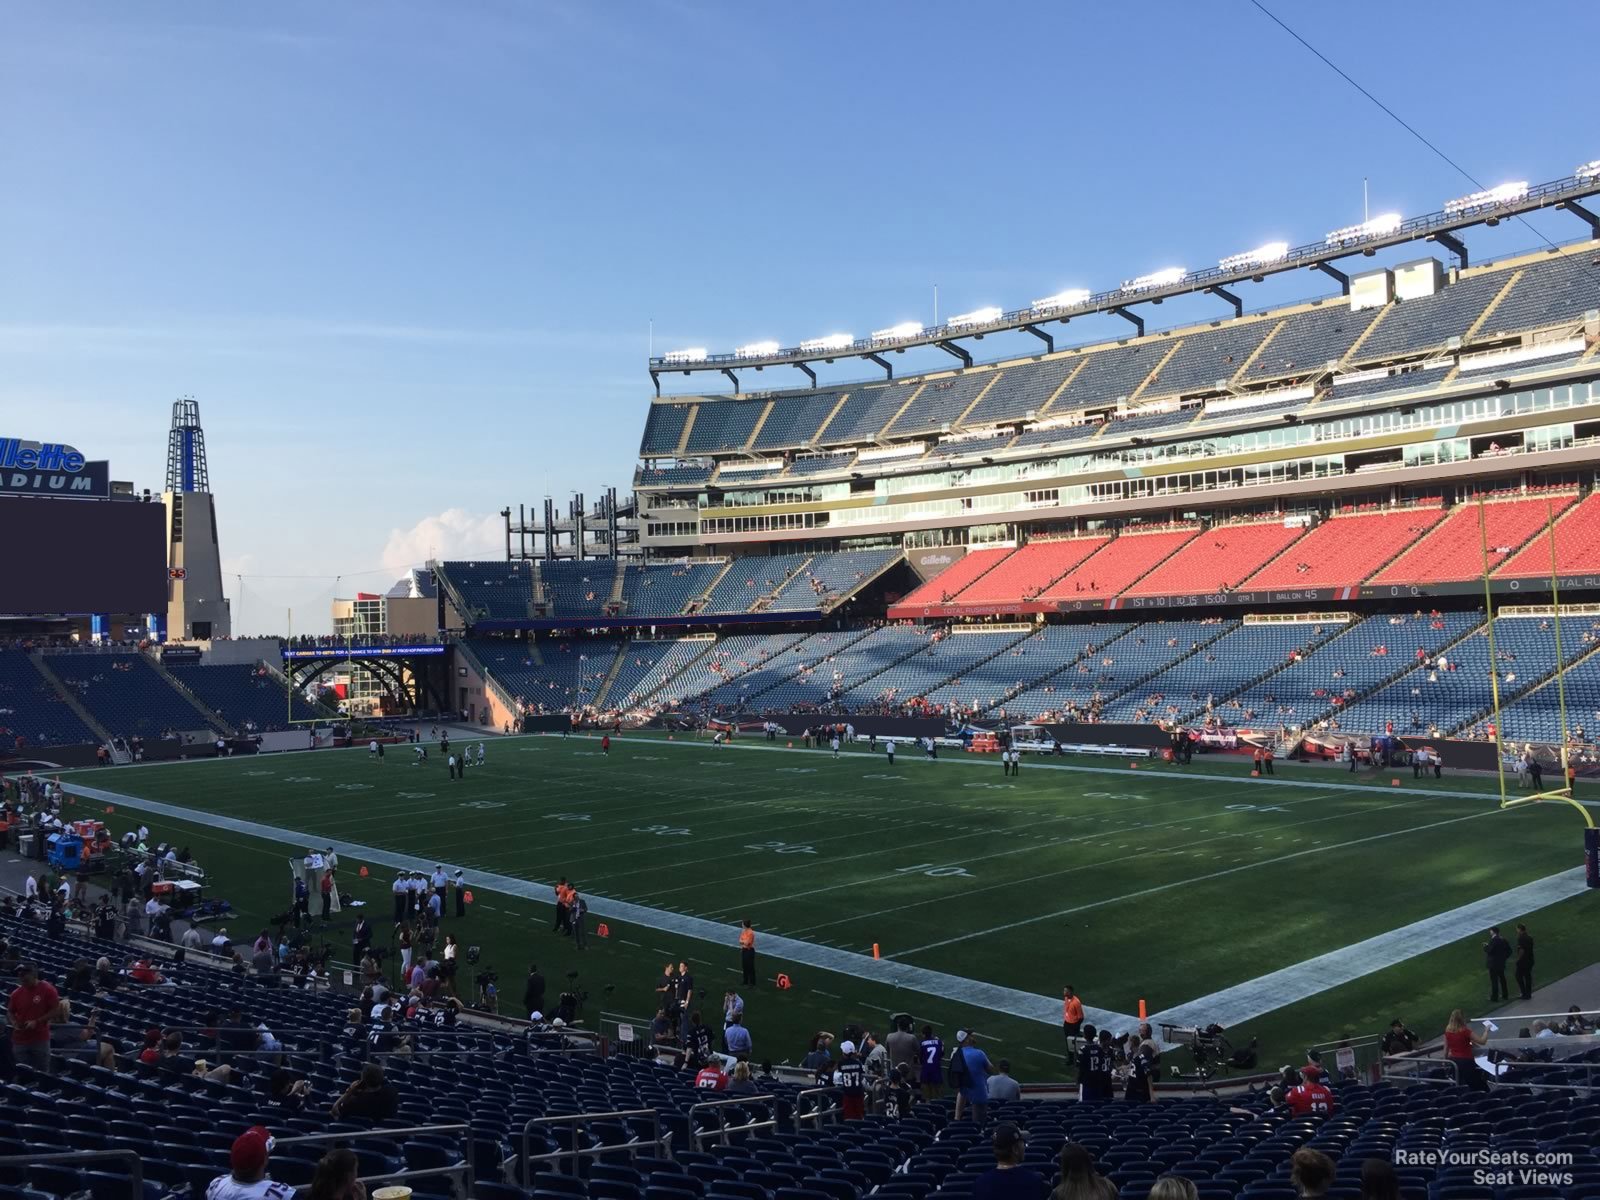 section 125, row 29 seat view  for football - gillette stadium